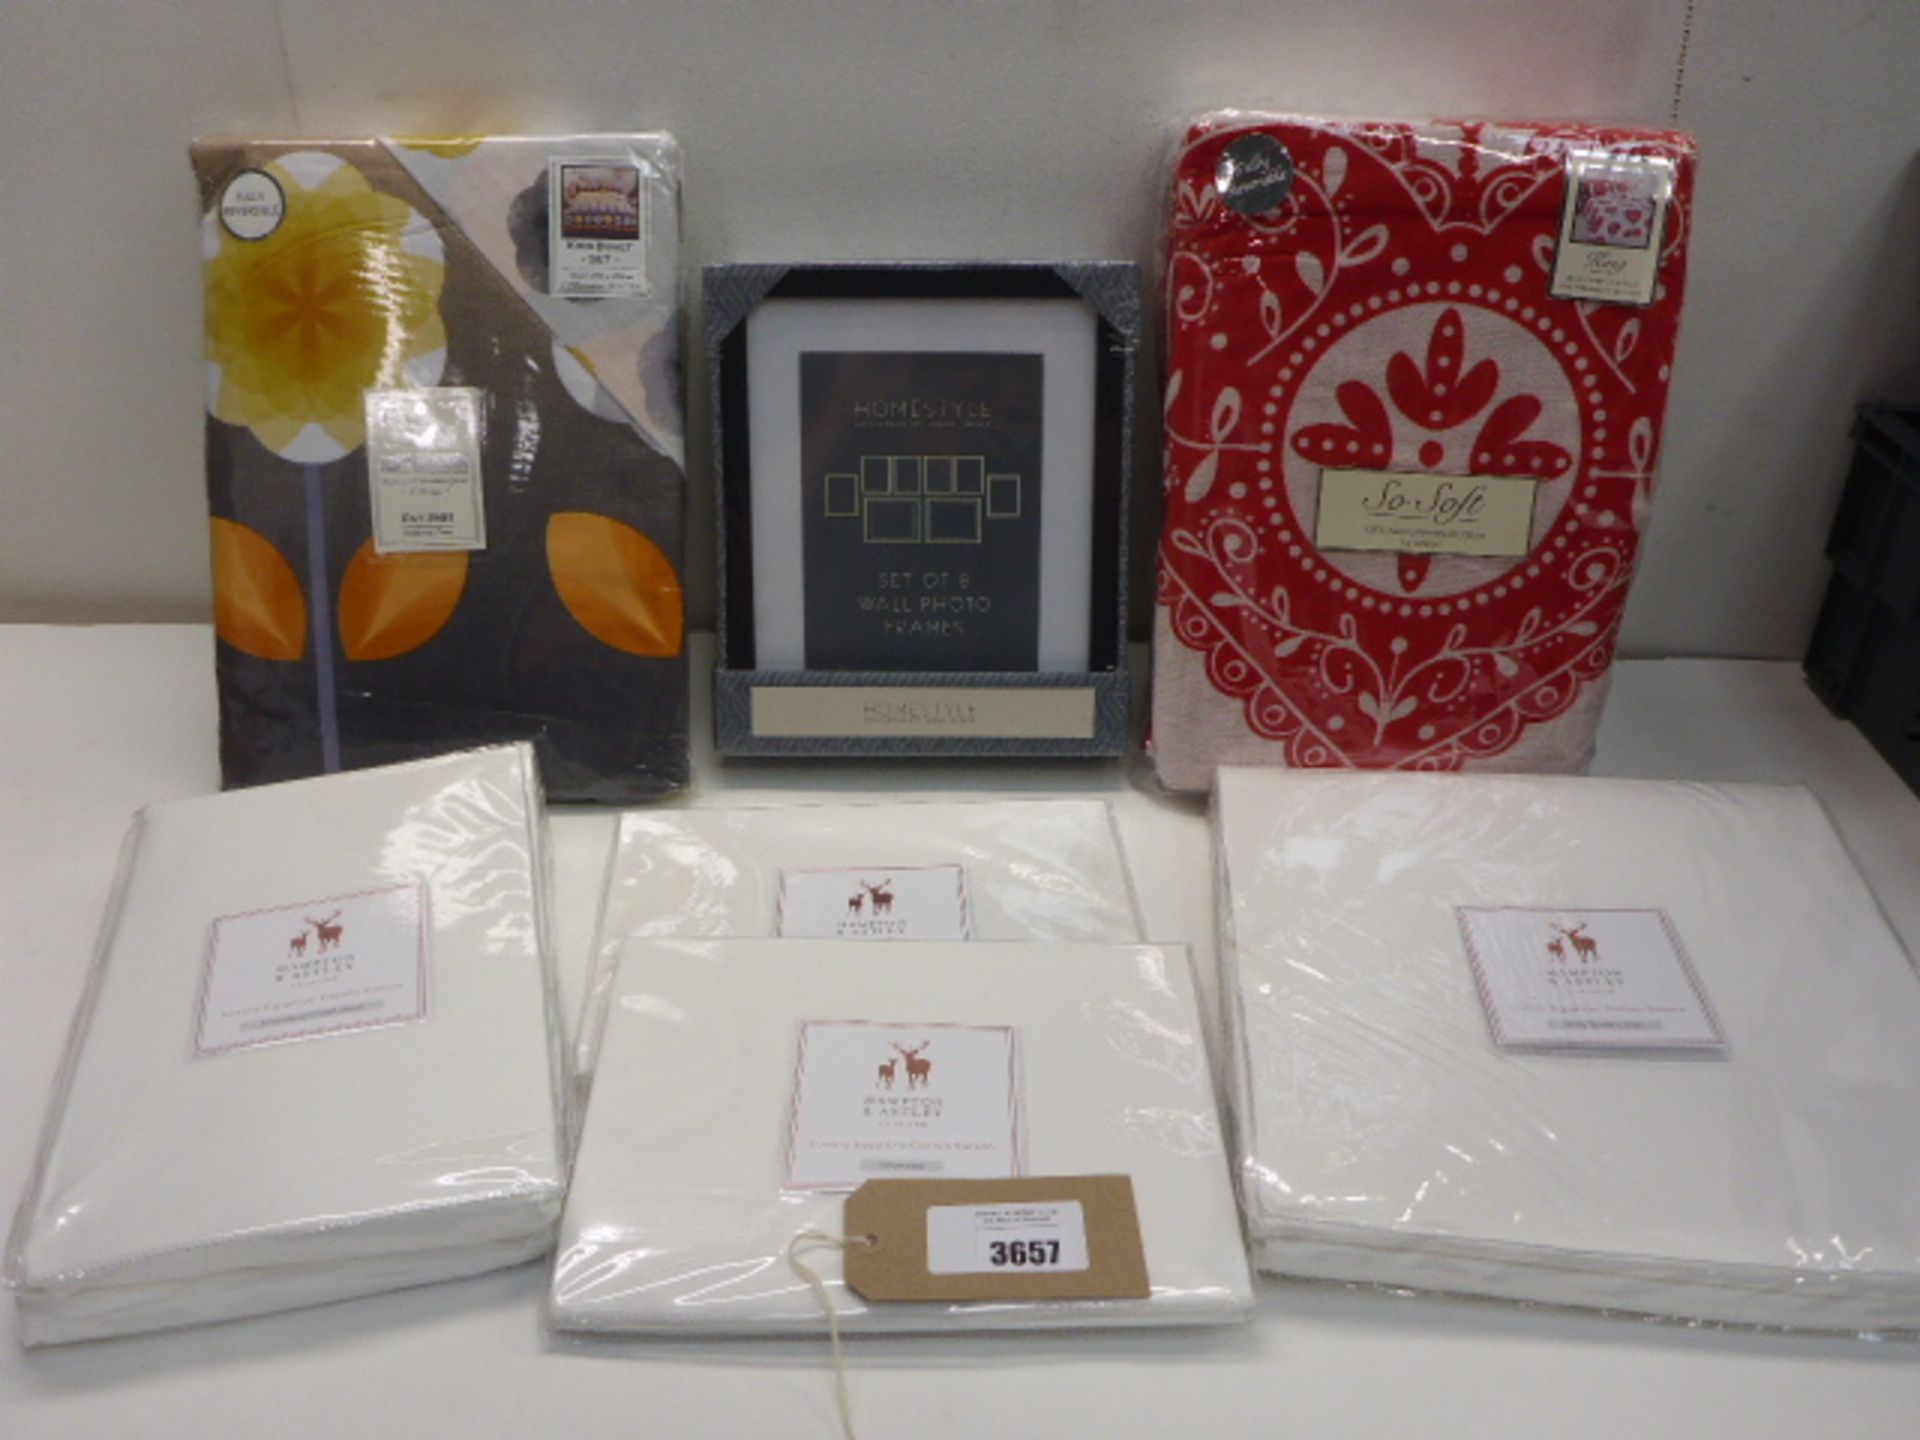 3 king size duvet sets, king size fitted sheet, pillowcases and Pack of 8 Homestyle picture frames